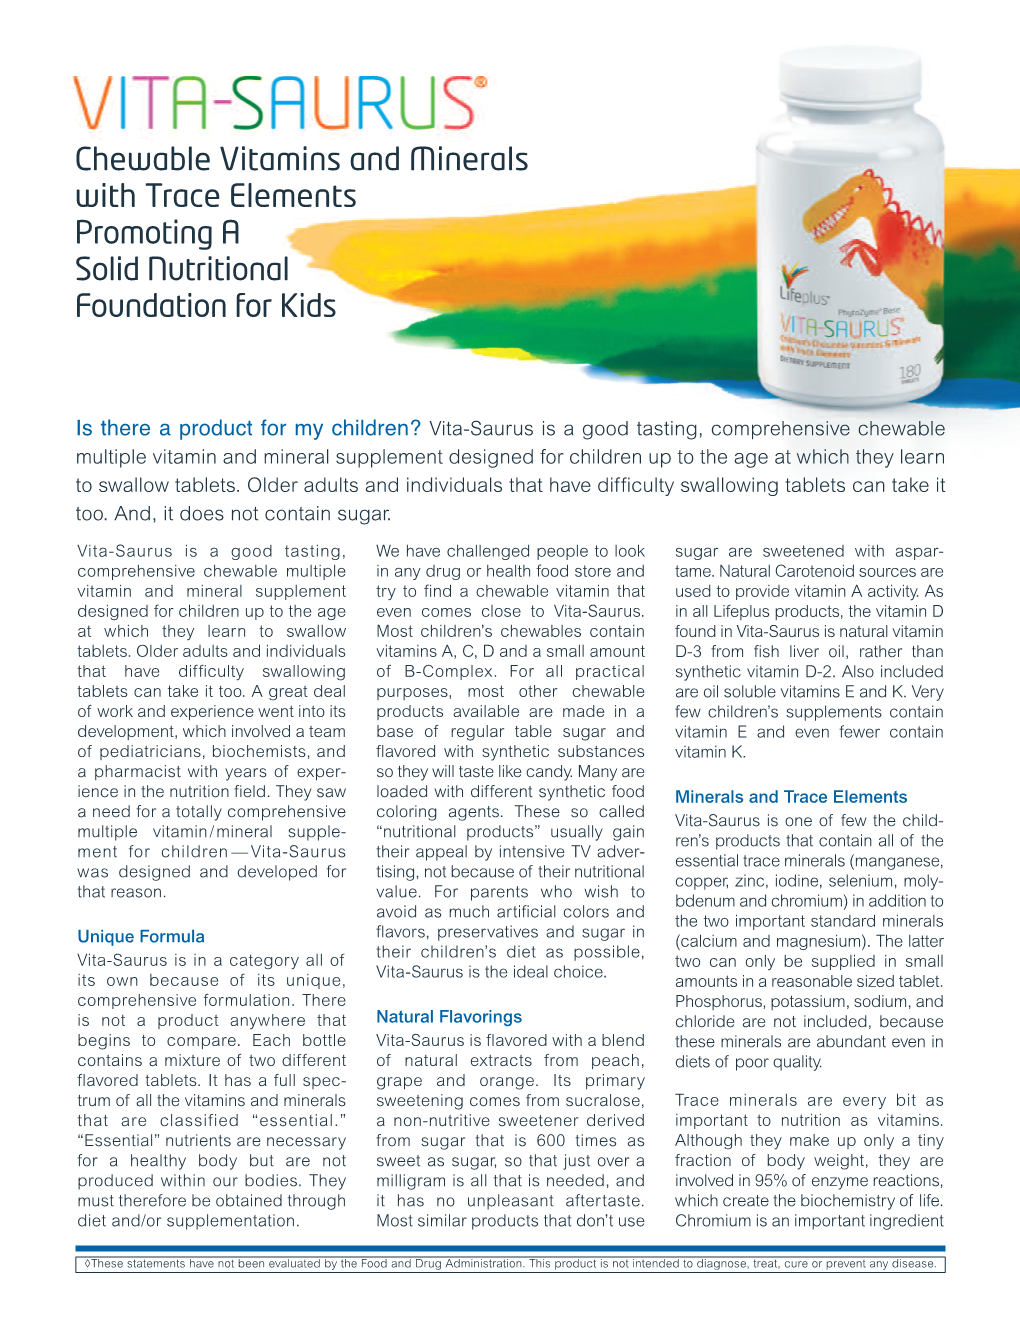 Chewable Vitamins and Minerals with Trace Elements Promoting a Solid Nutritional Foundation for Kids